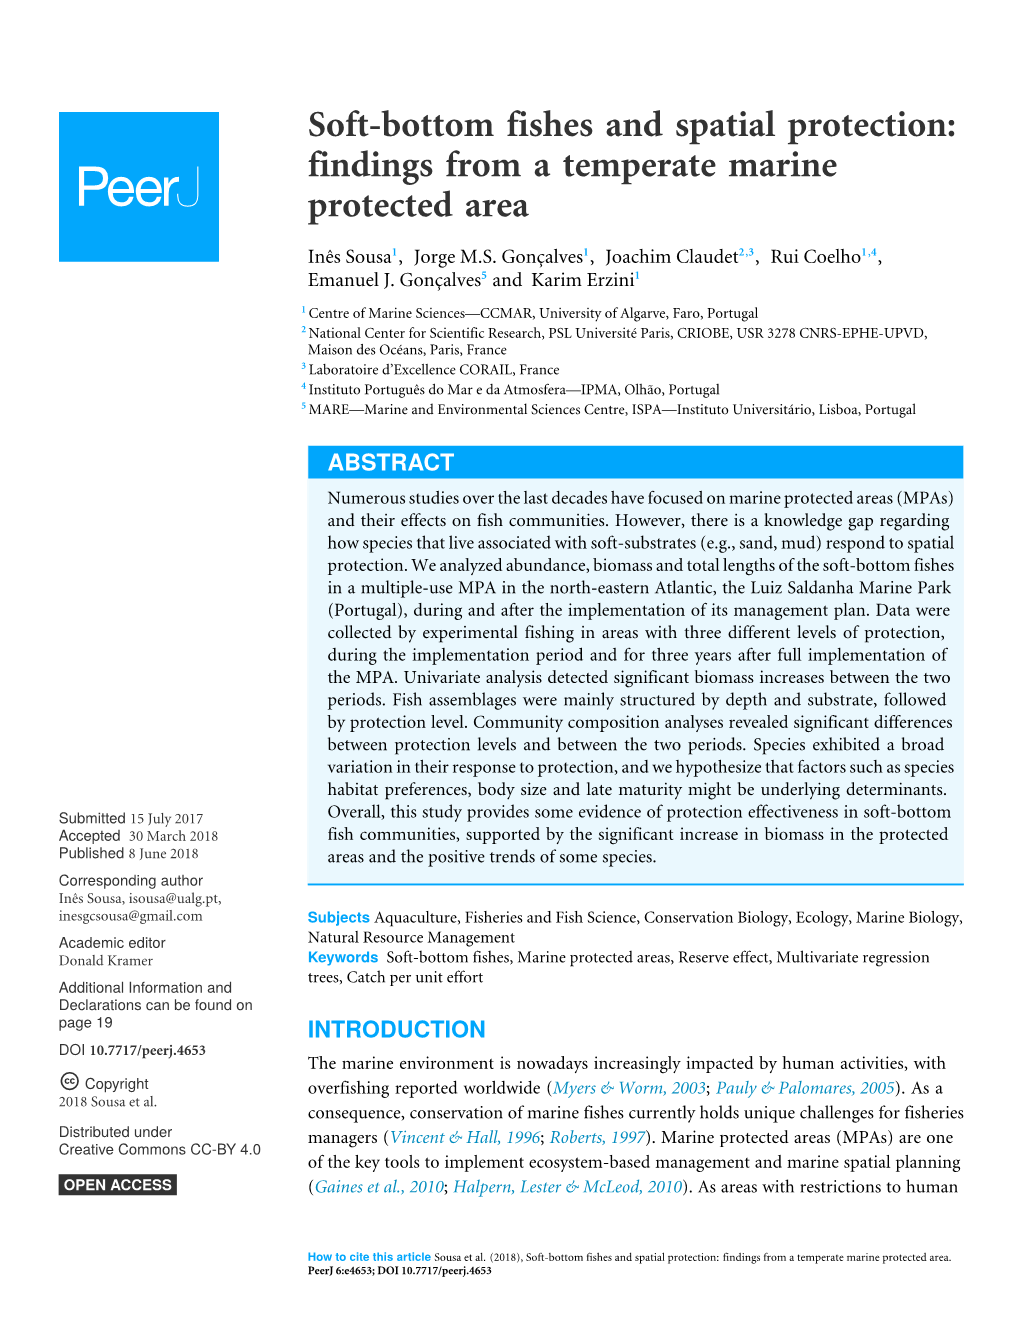 Findings from a Temperate Marine Protected Area